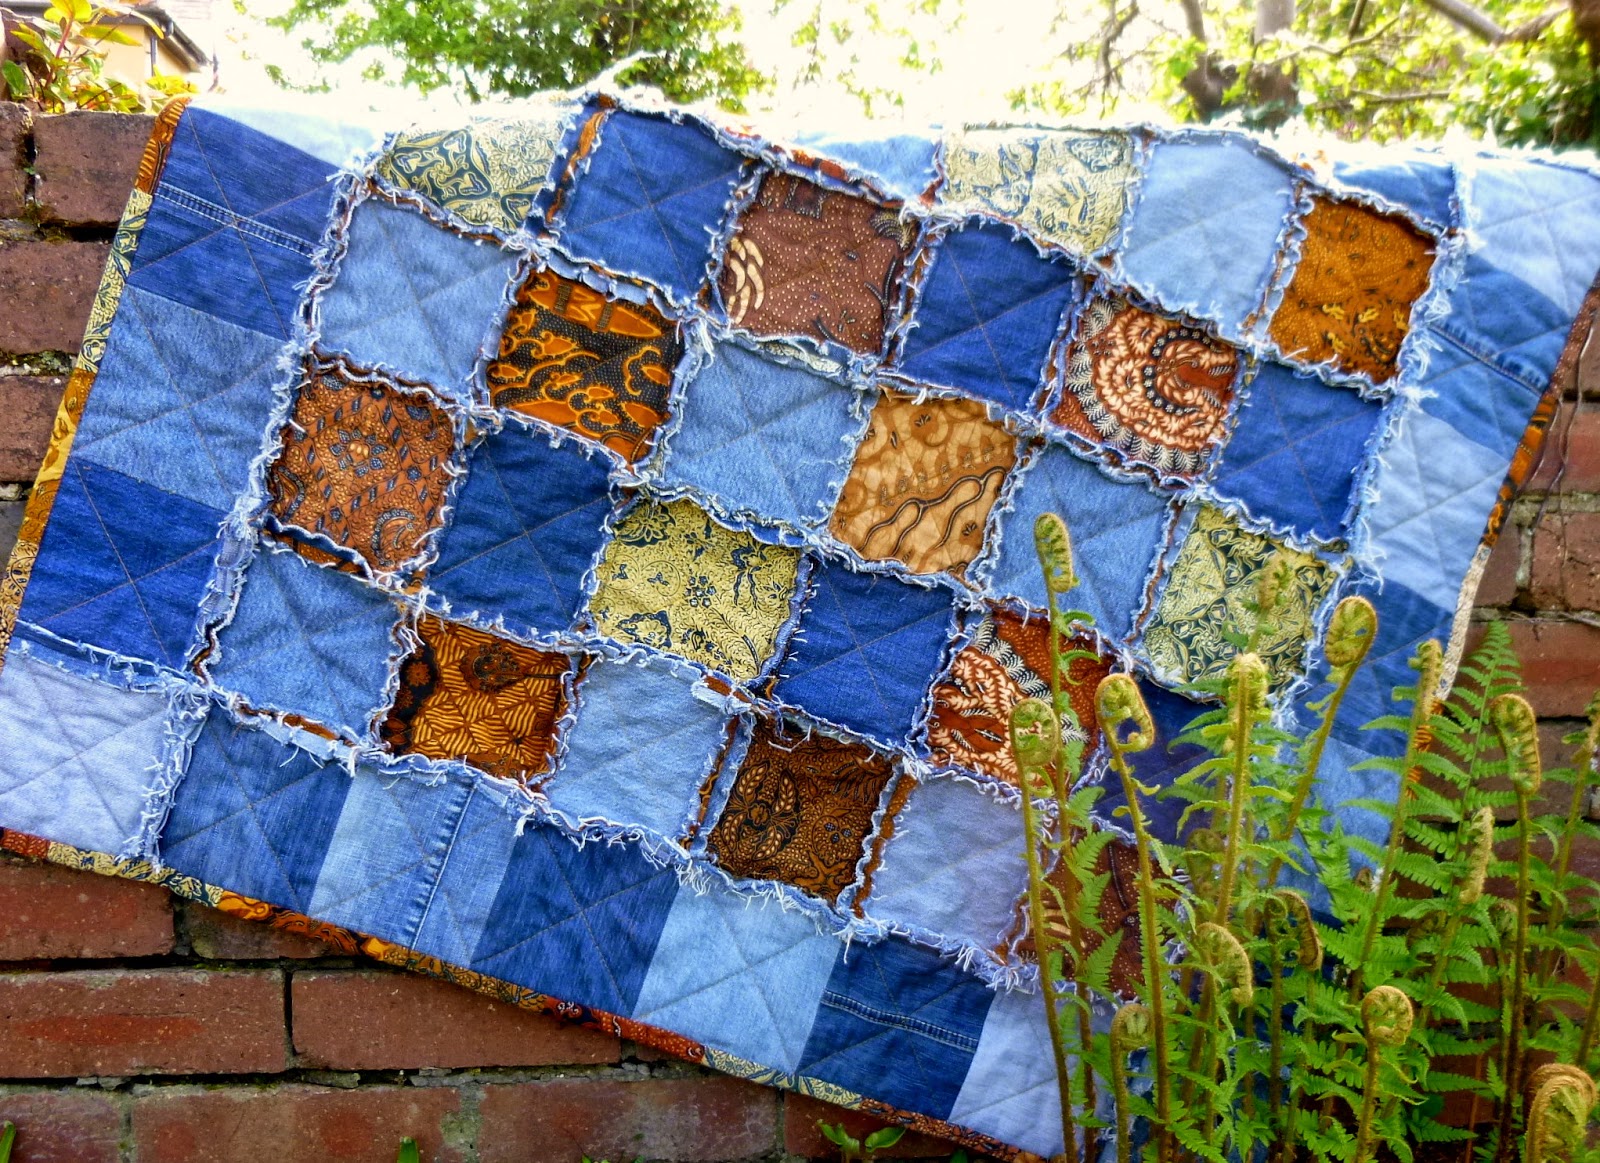 The Old Button: From Jean Jeanie to Golden Brown - Upcycled Denim Patchwork  Picnic Rug